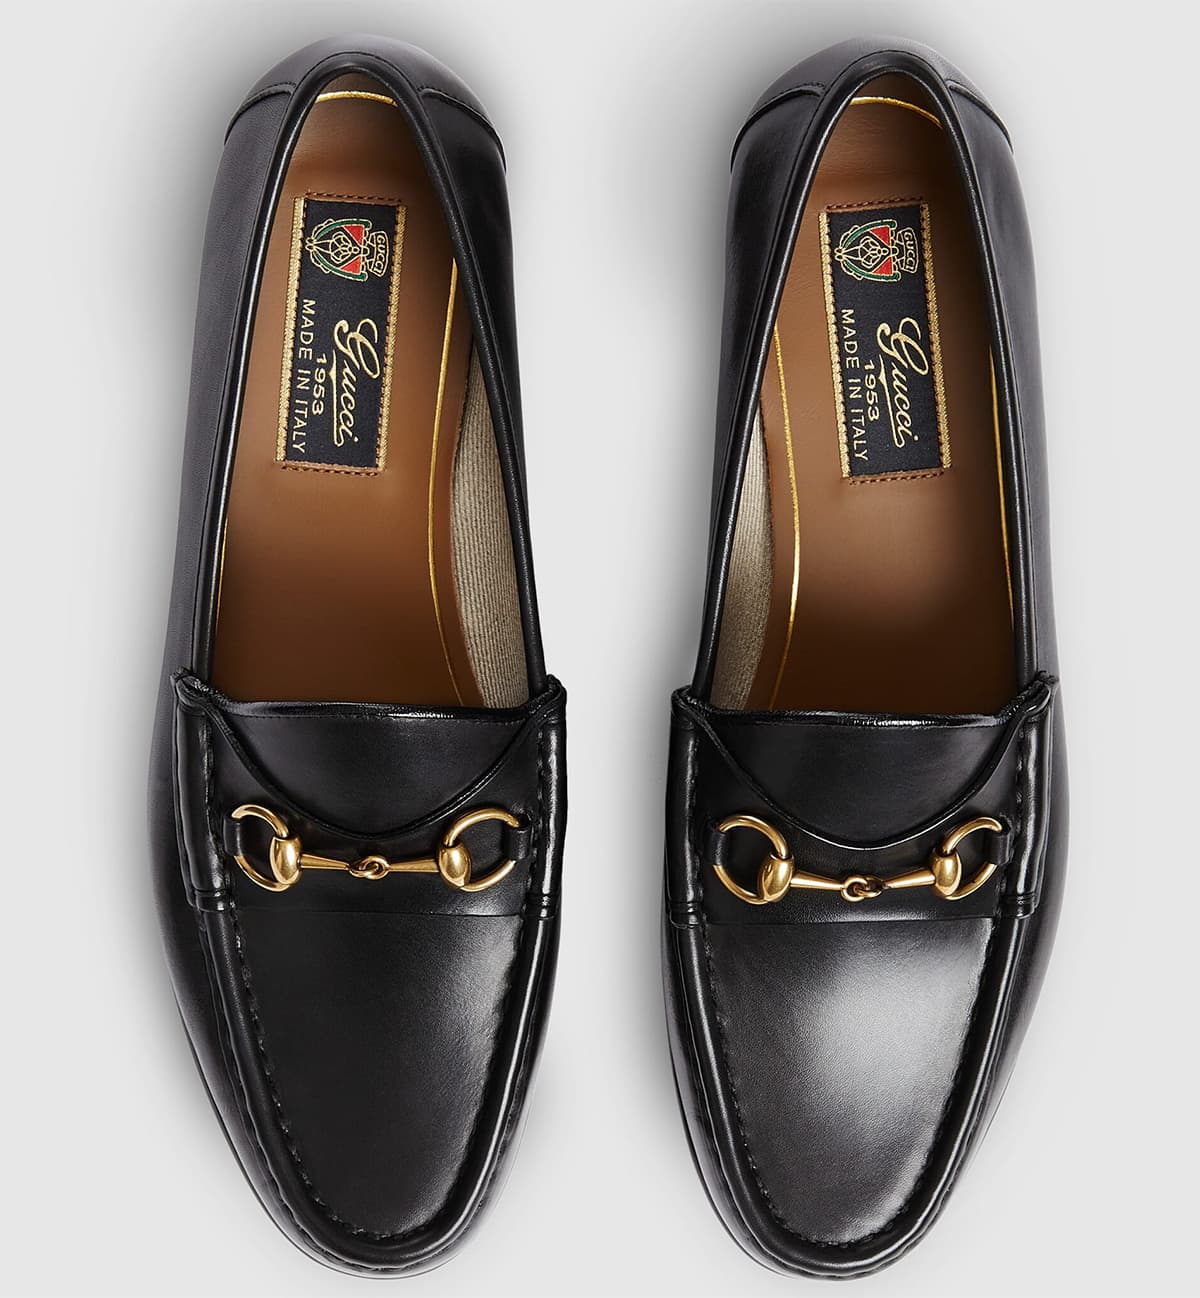 Gucci Guide: 3 Most Popular Shoes and Shoe Size Conversion